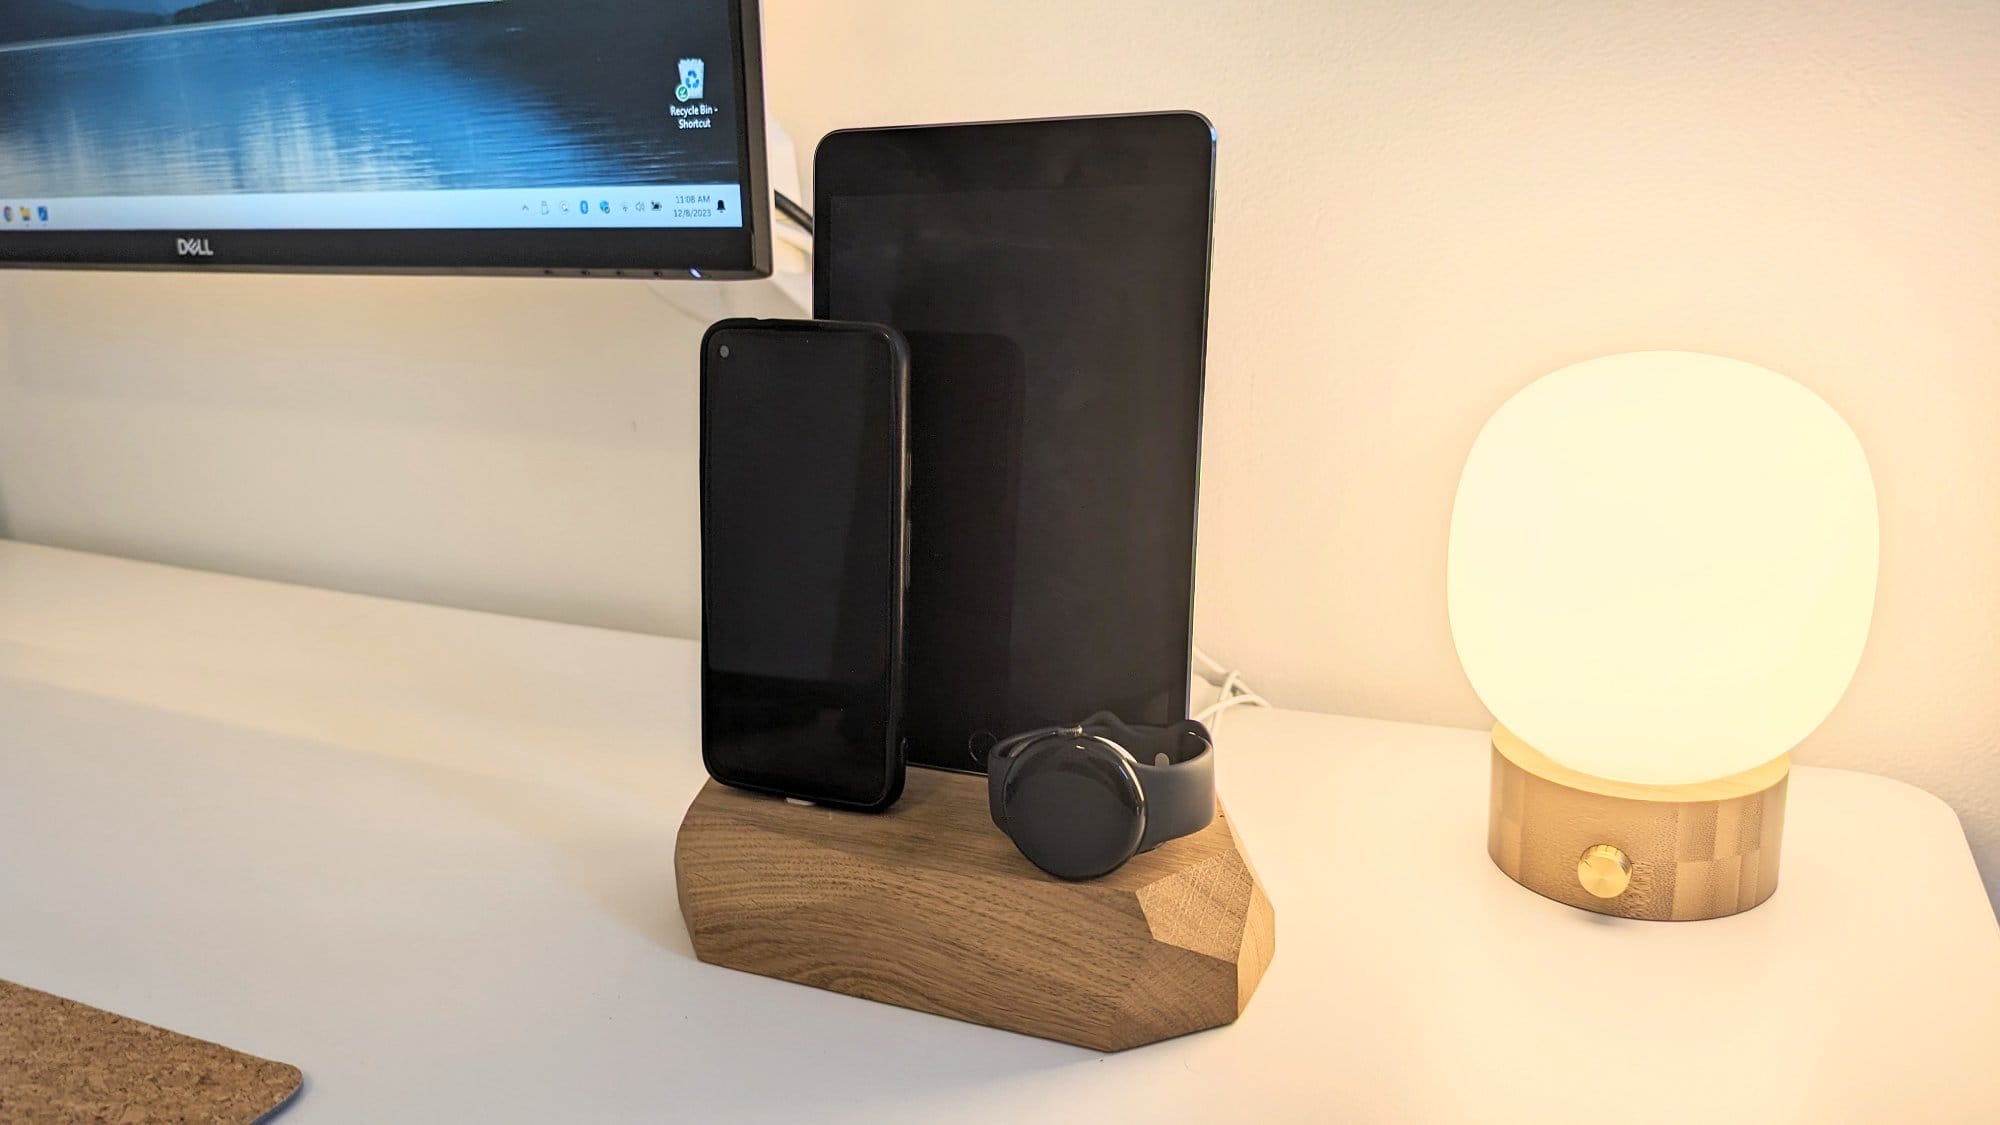 A triple charging dock from Oakywood, designed to hold and charge multiple devices simultaneously